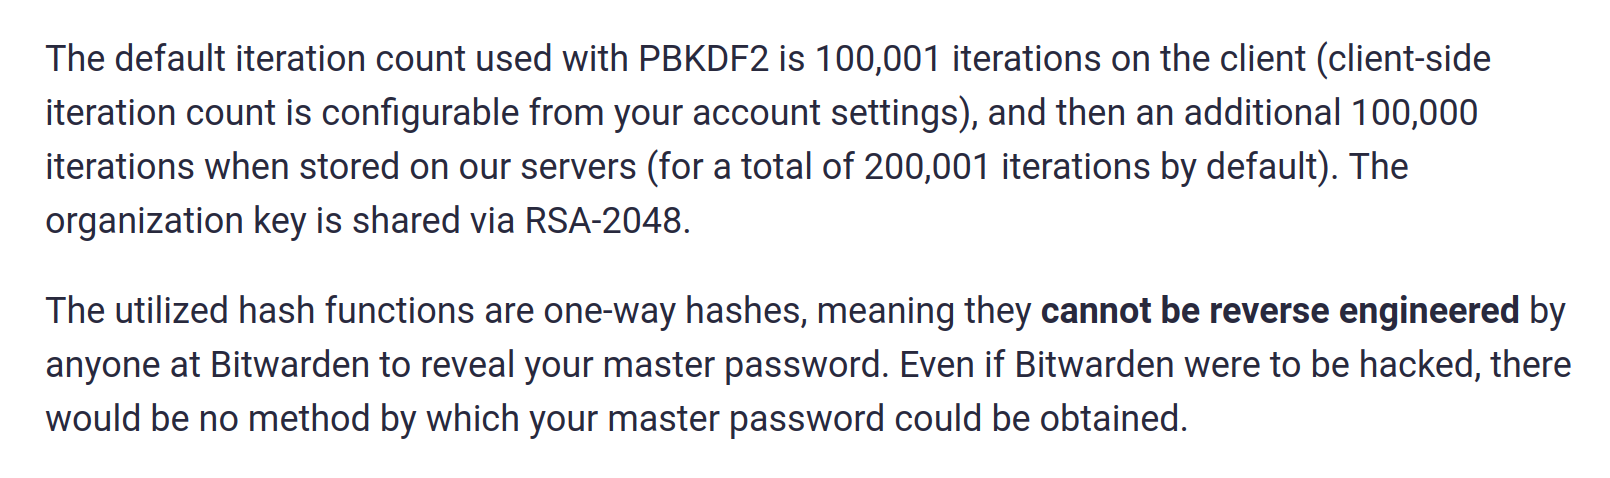  The default iteration count used with PBKDF2 is 100,001 iterations on the client (client-side iteration count is configurable from your account settings), and then an additional 100,000 iterations when stored on our servers (for a total of 200,001 iterations by default). The organization key is shared via RSA-2048. The utilized hash functions are one-way hashes, meaning they cannot be reverse engineered by anyone at Bitwarden to reveal your master password. Even if Bitwarden were to be hacked, there would be no method by which your master password could be obtained.